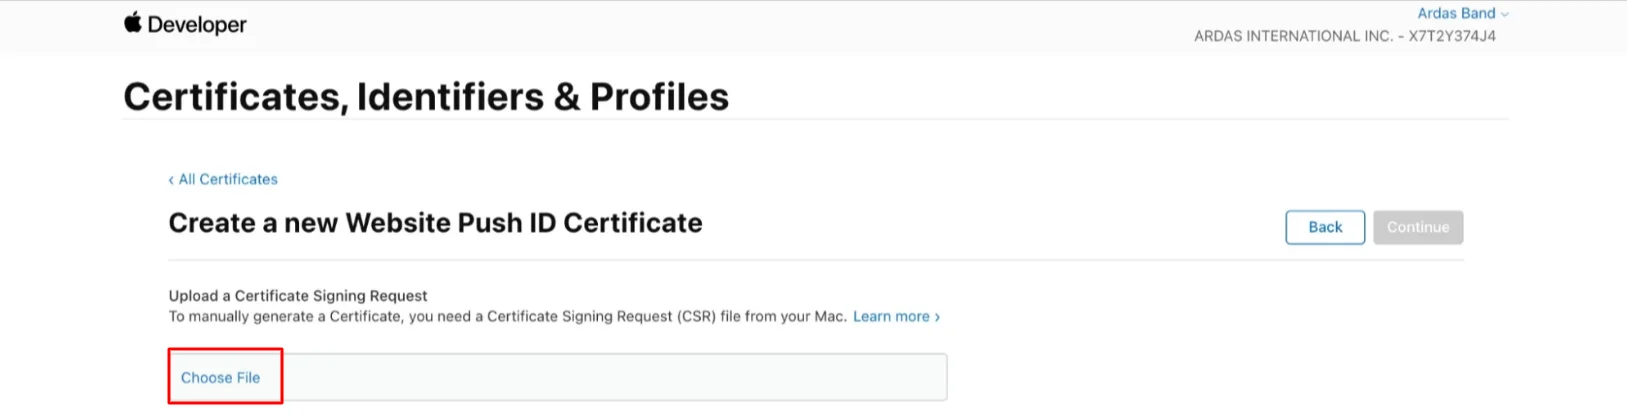 Upload a Certificate Signing Request